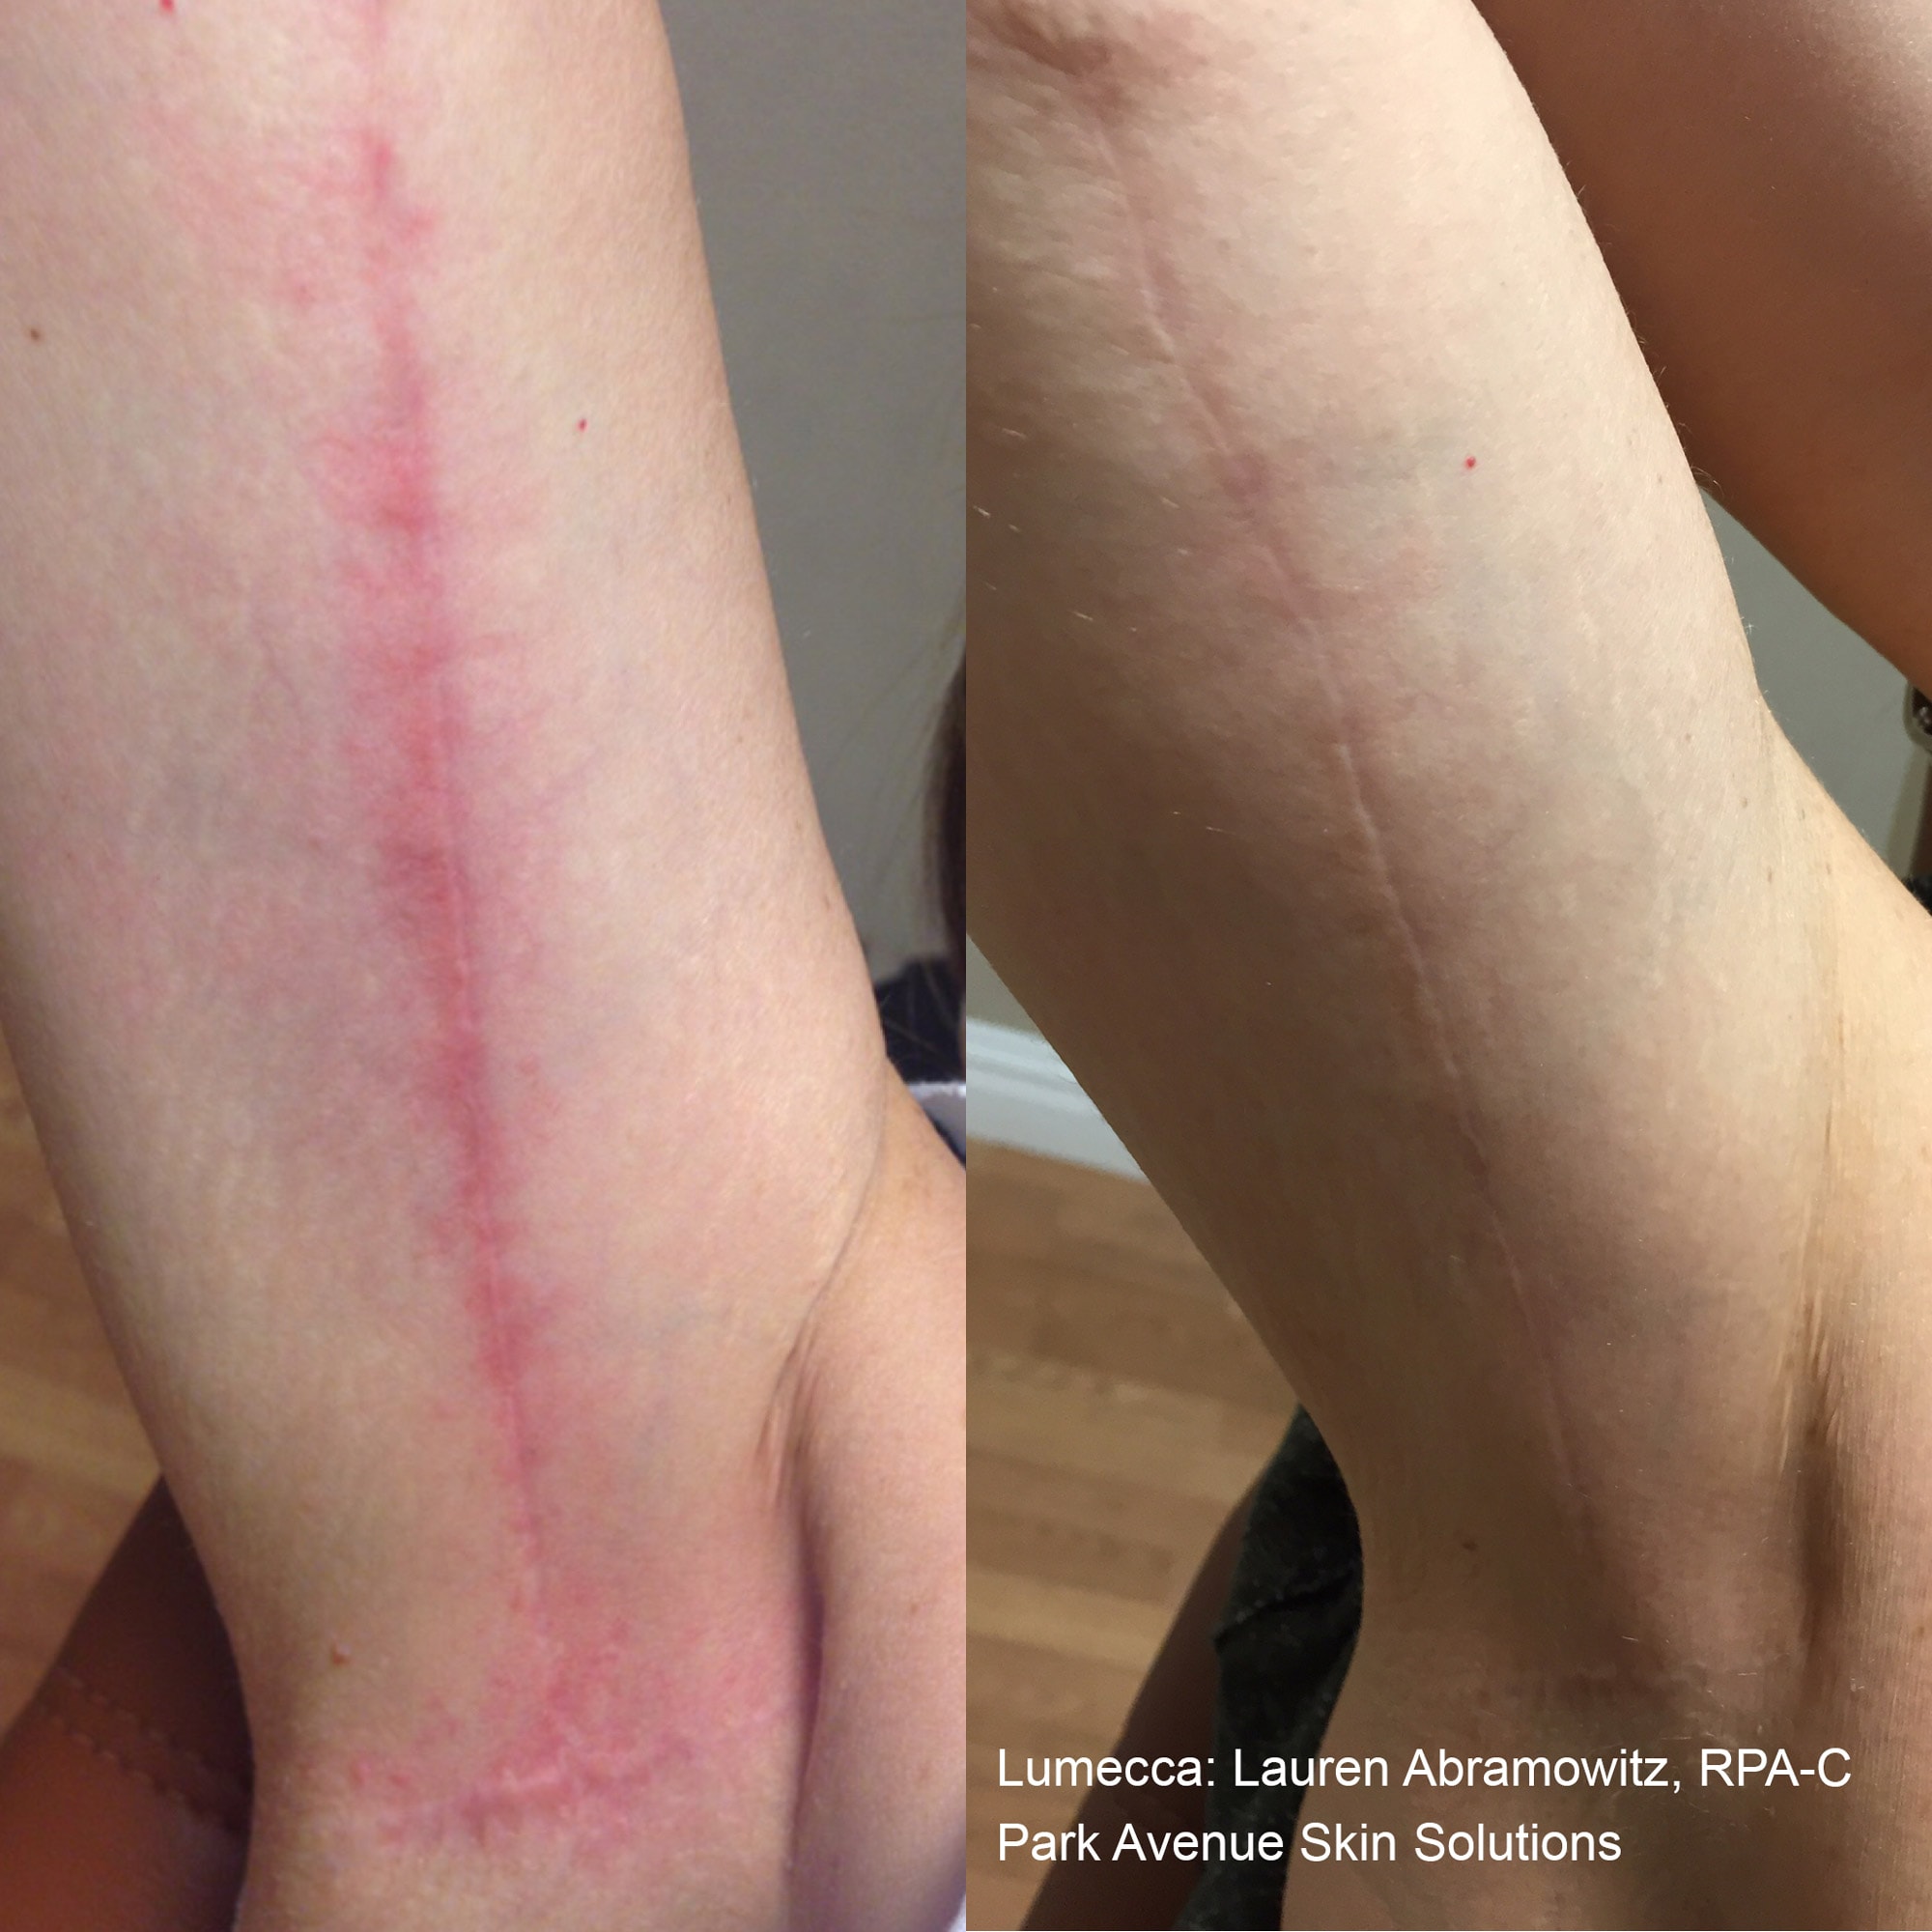 Before and After photos of Lumecca treatments reducing the angry redness on a surgical scar on a woman’s arm